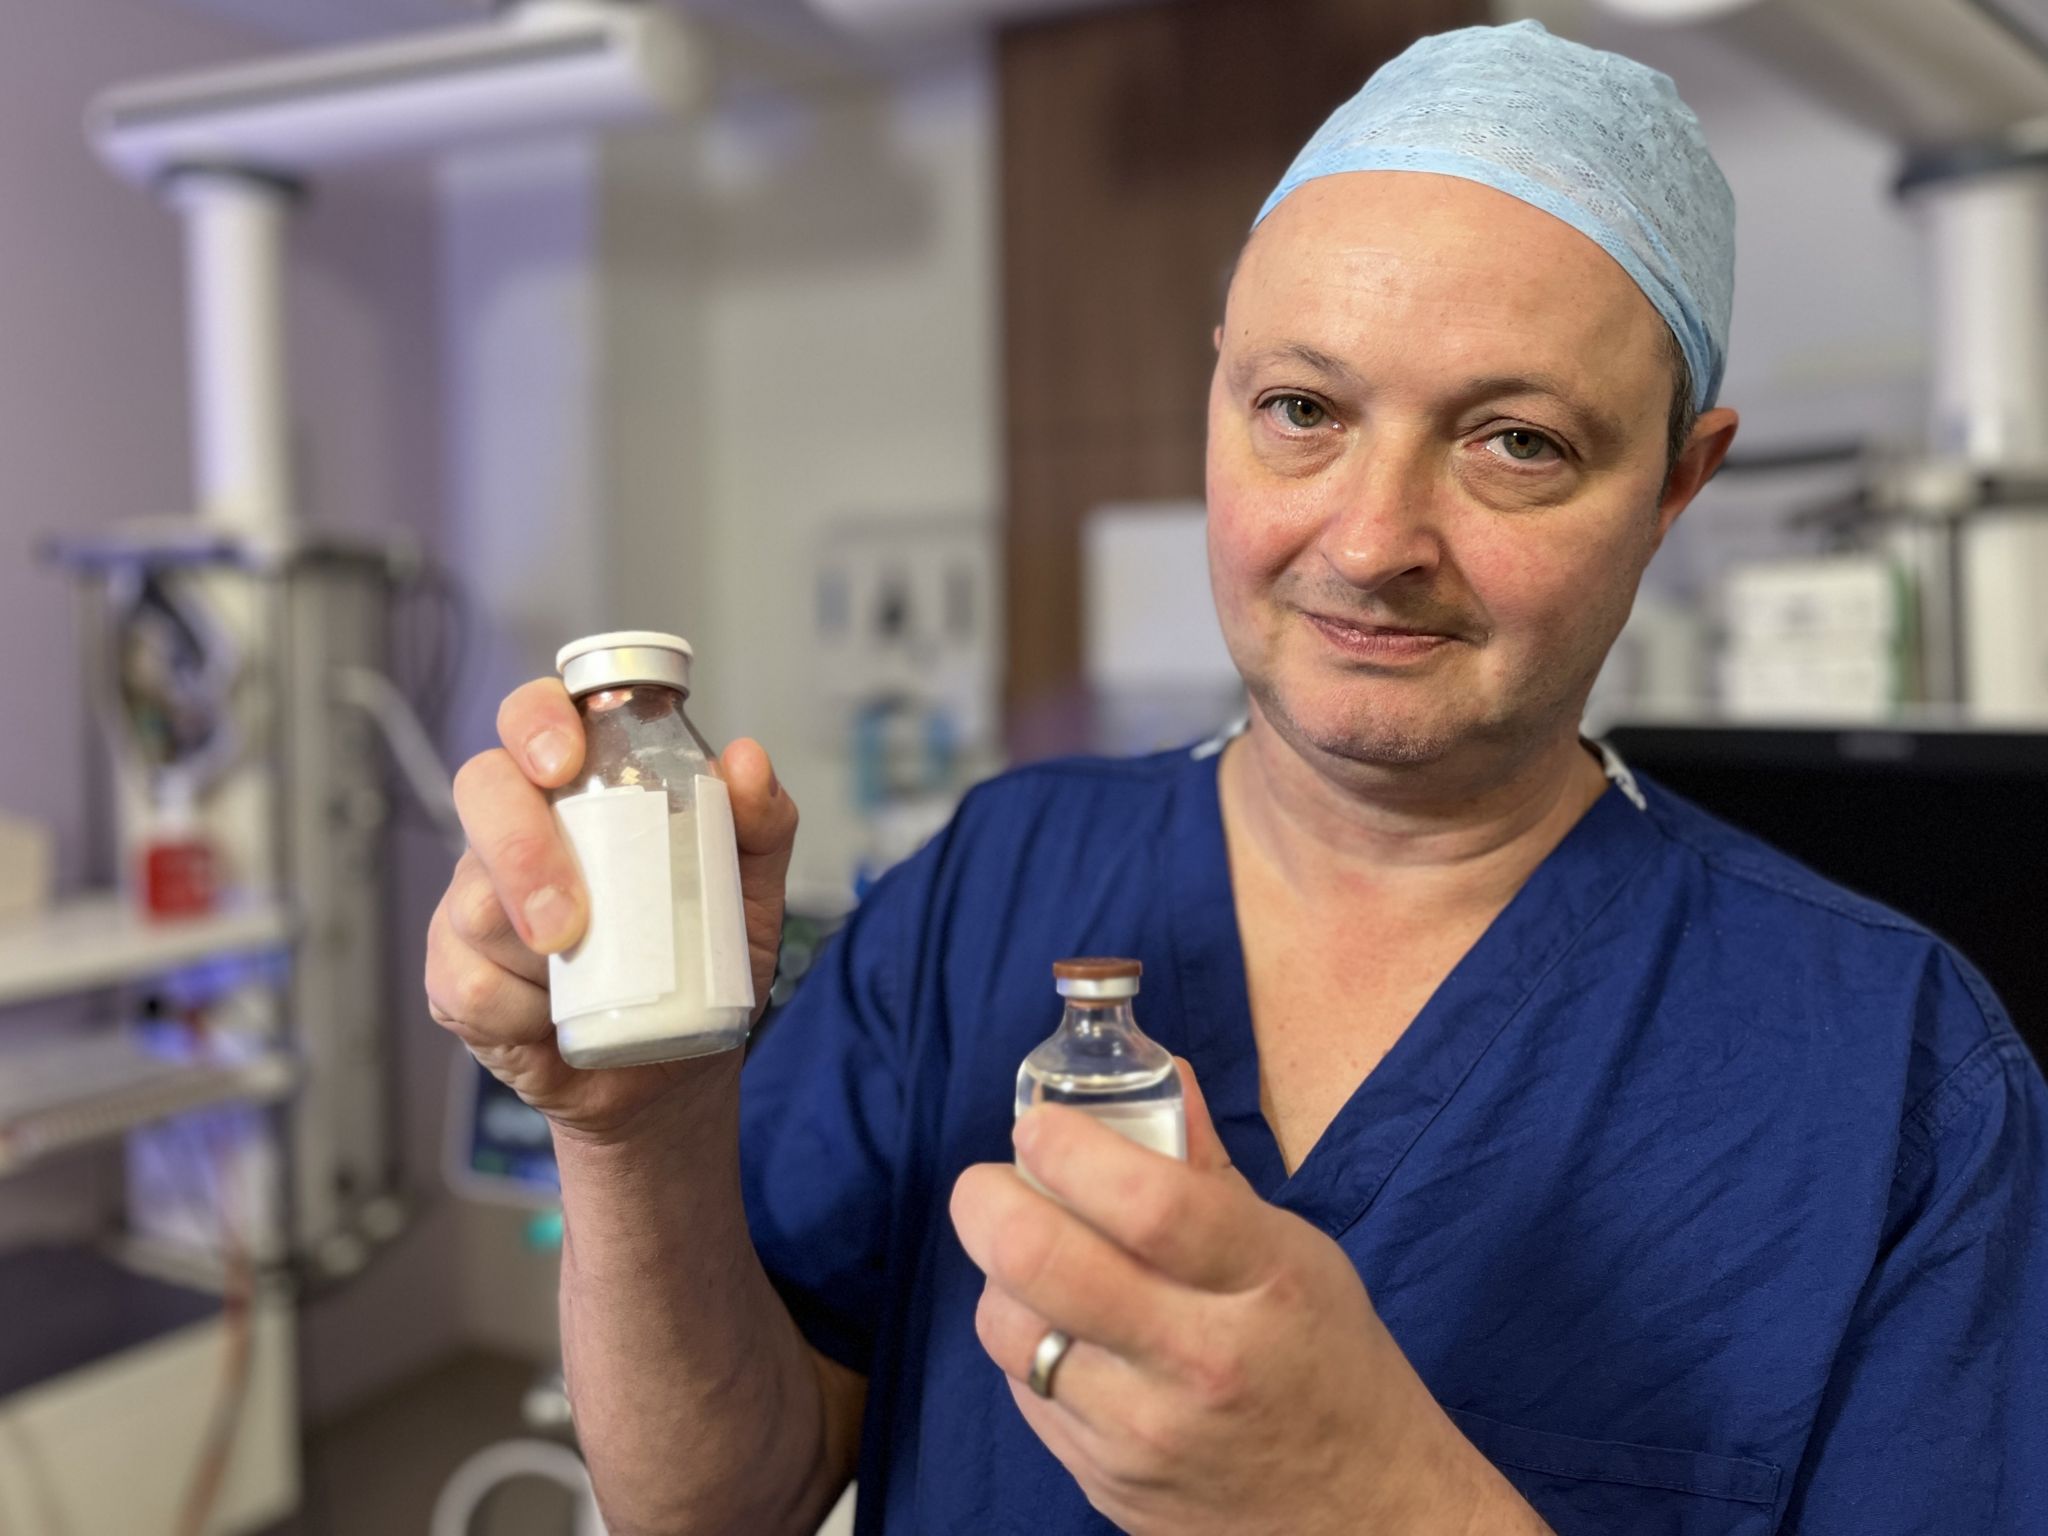 Consultant anaesthetist Dr Andy Klein holding the 'powdered blood' product